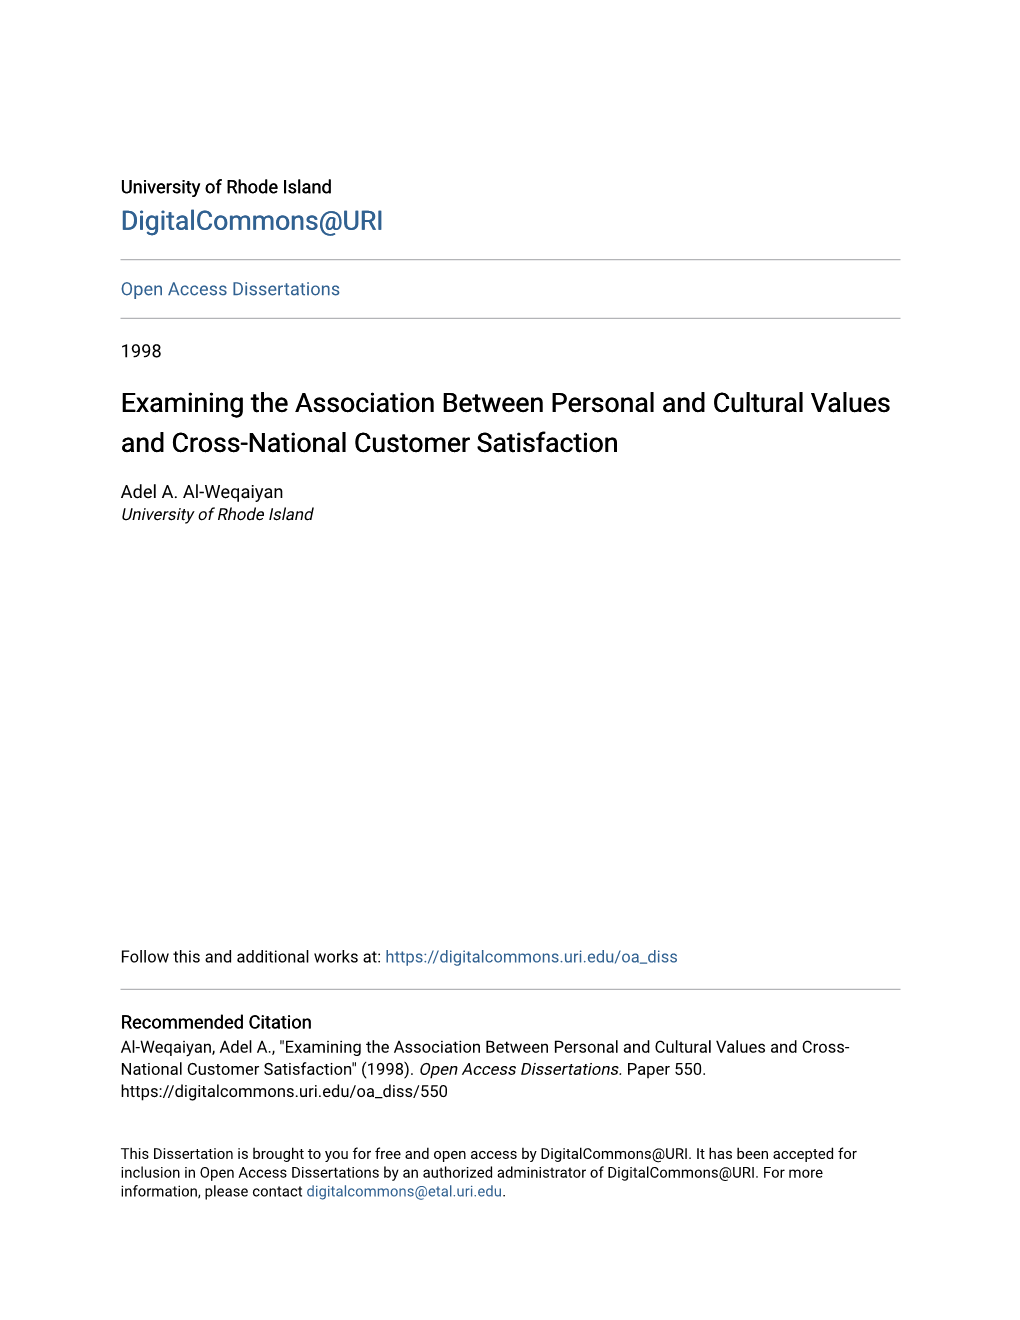 Examining the Association Between Personal and Cultural Values and Cross-National Customer Satisfaction